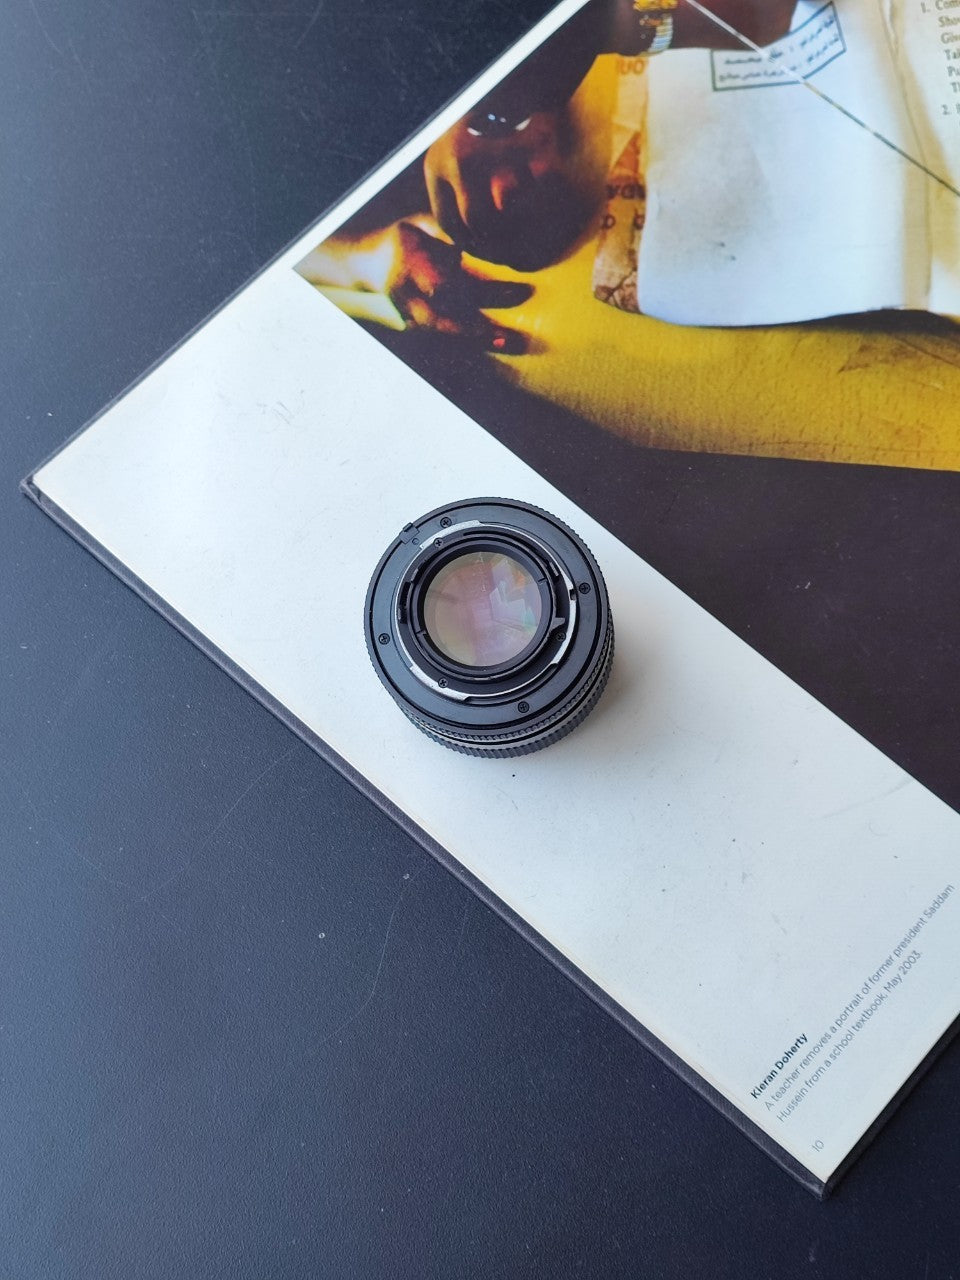 [Sold As-is] Contax Carl Zeiss Planar 50mm F1.4 T* MMJ